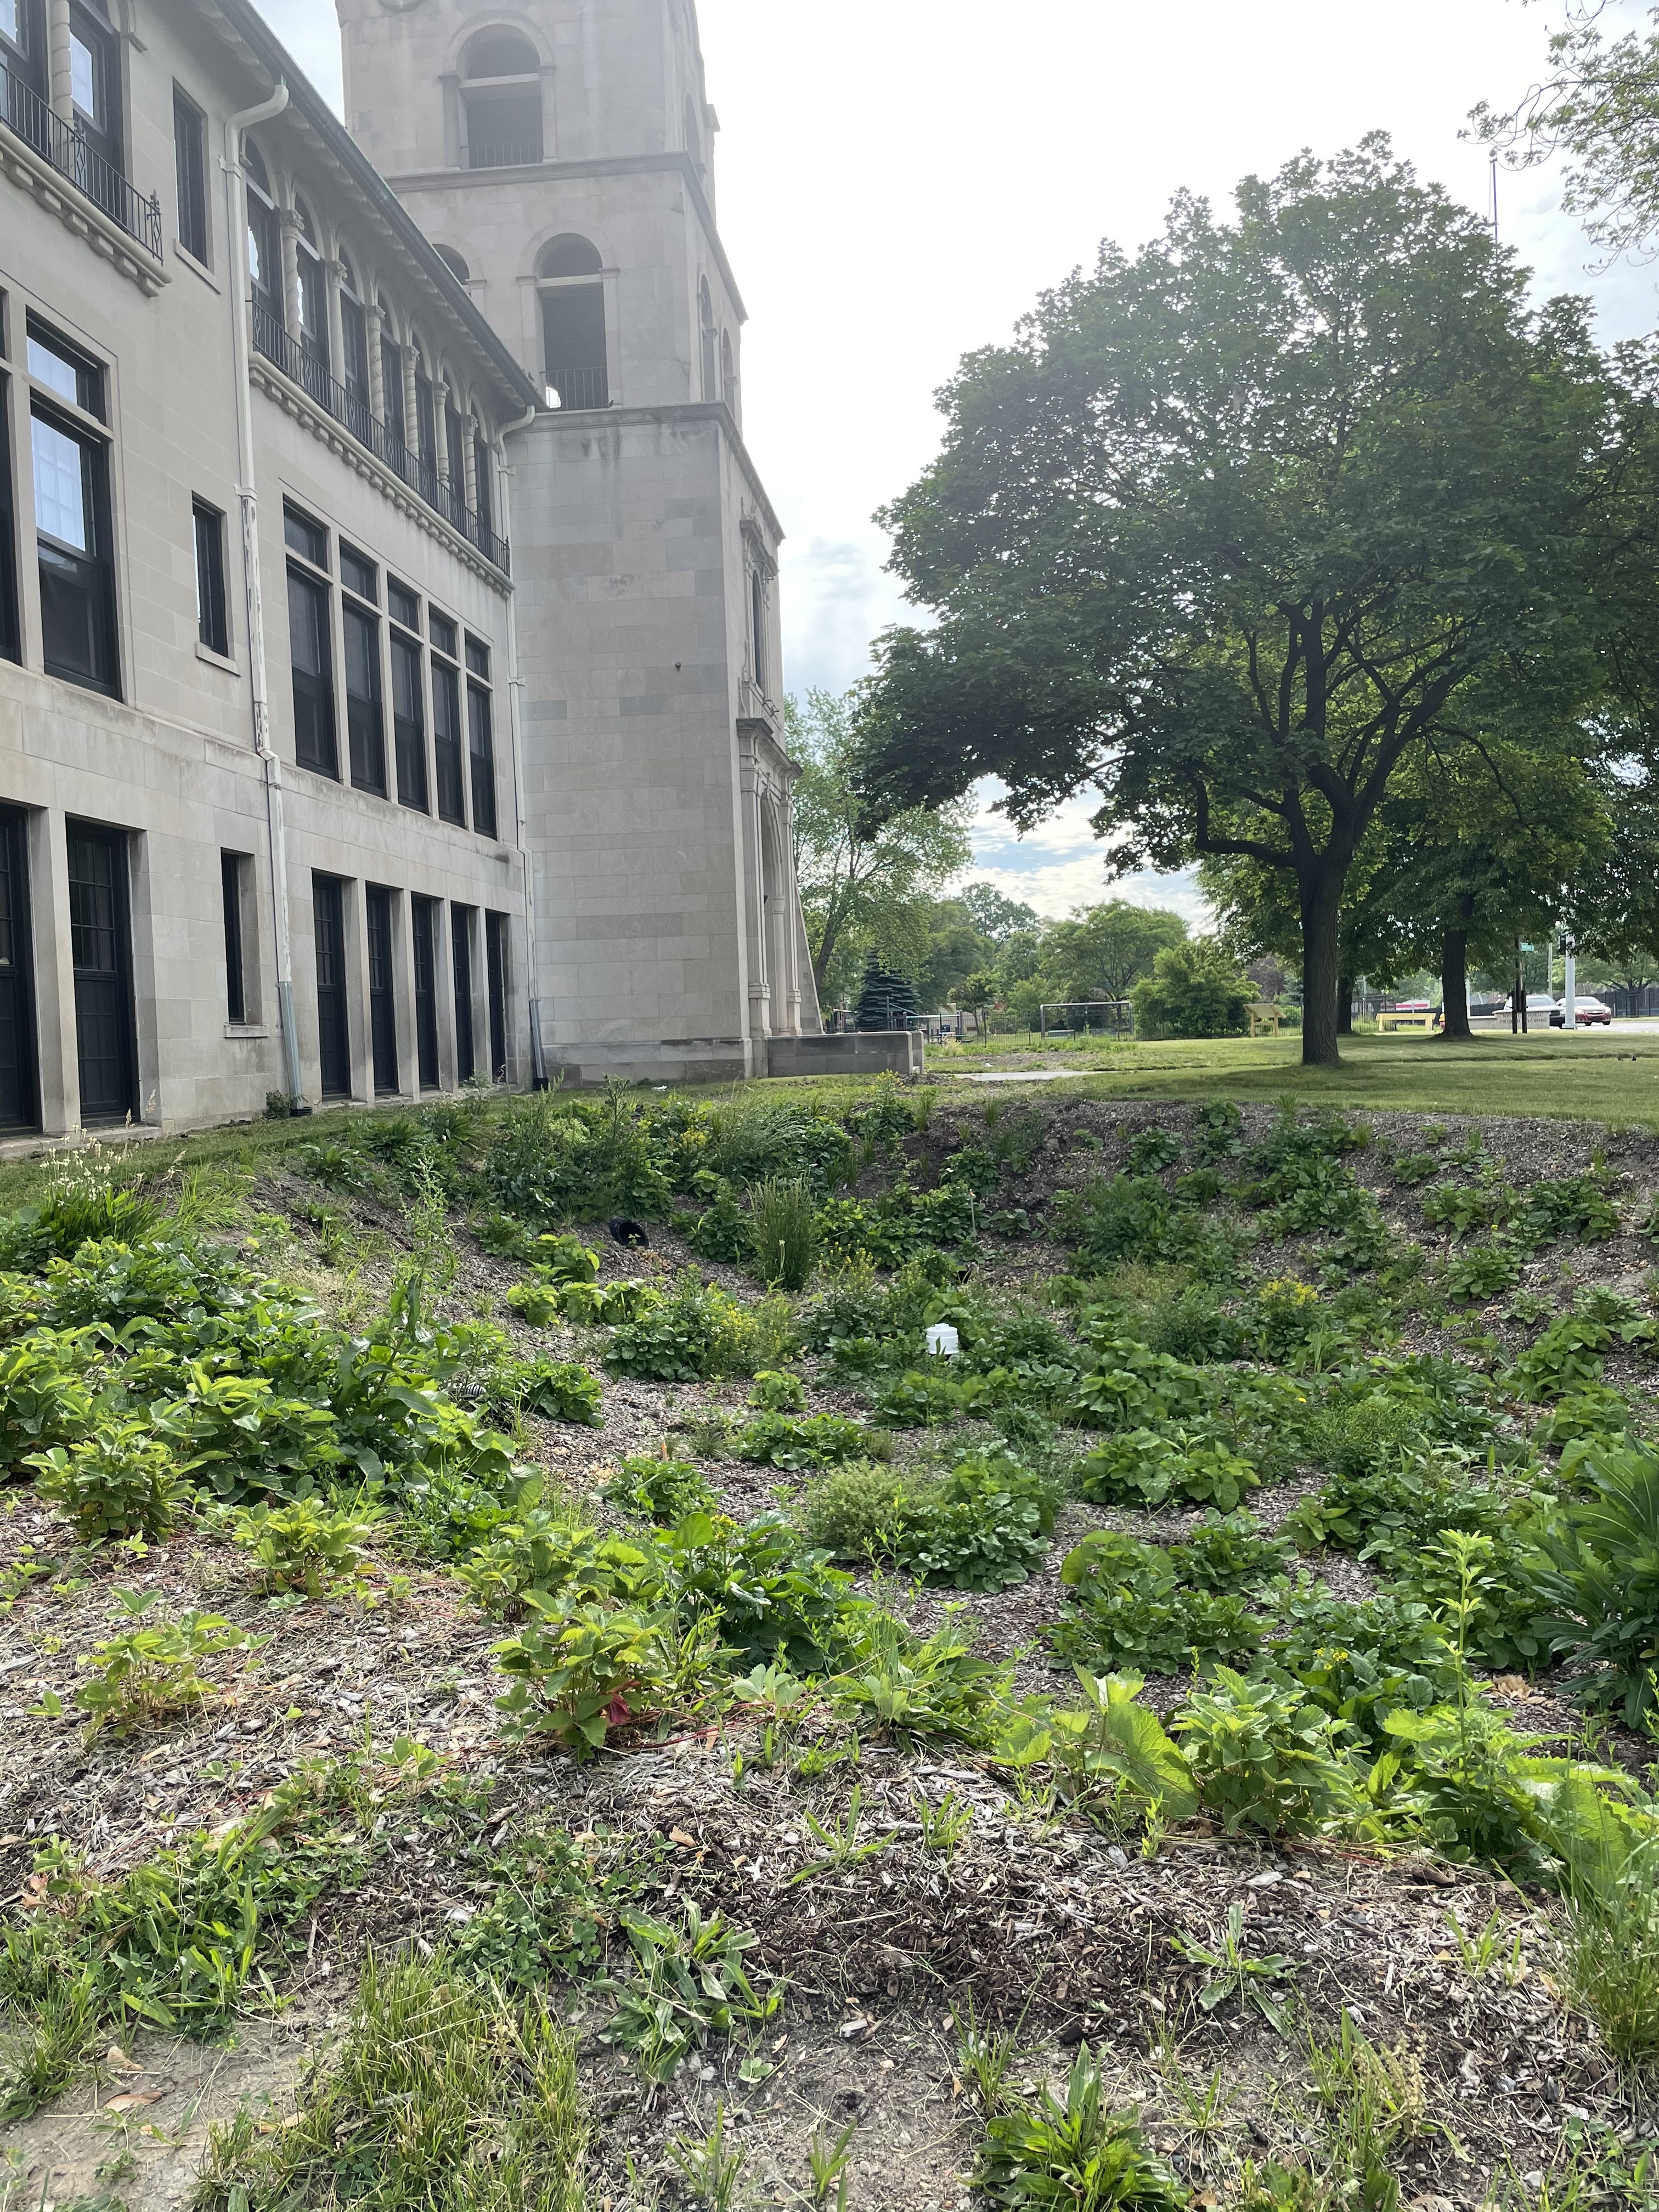 Part of the church, and one of the rain gardens at Gesu Catholic church.